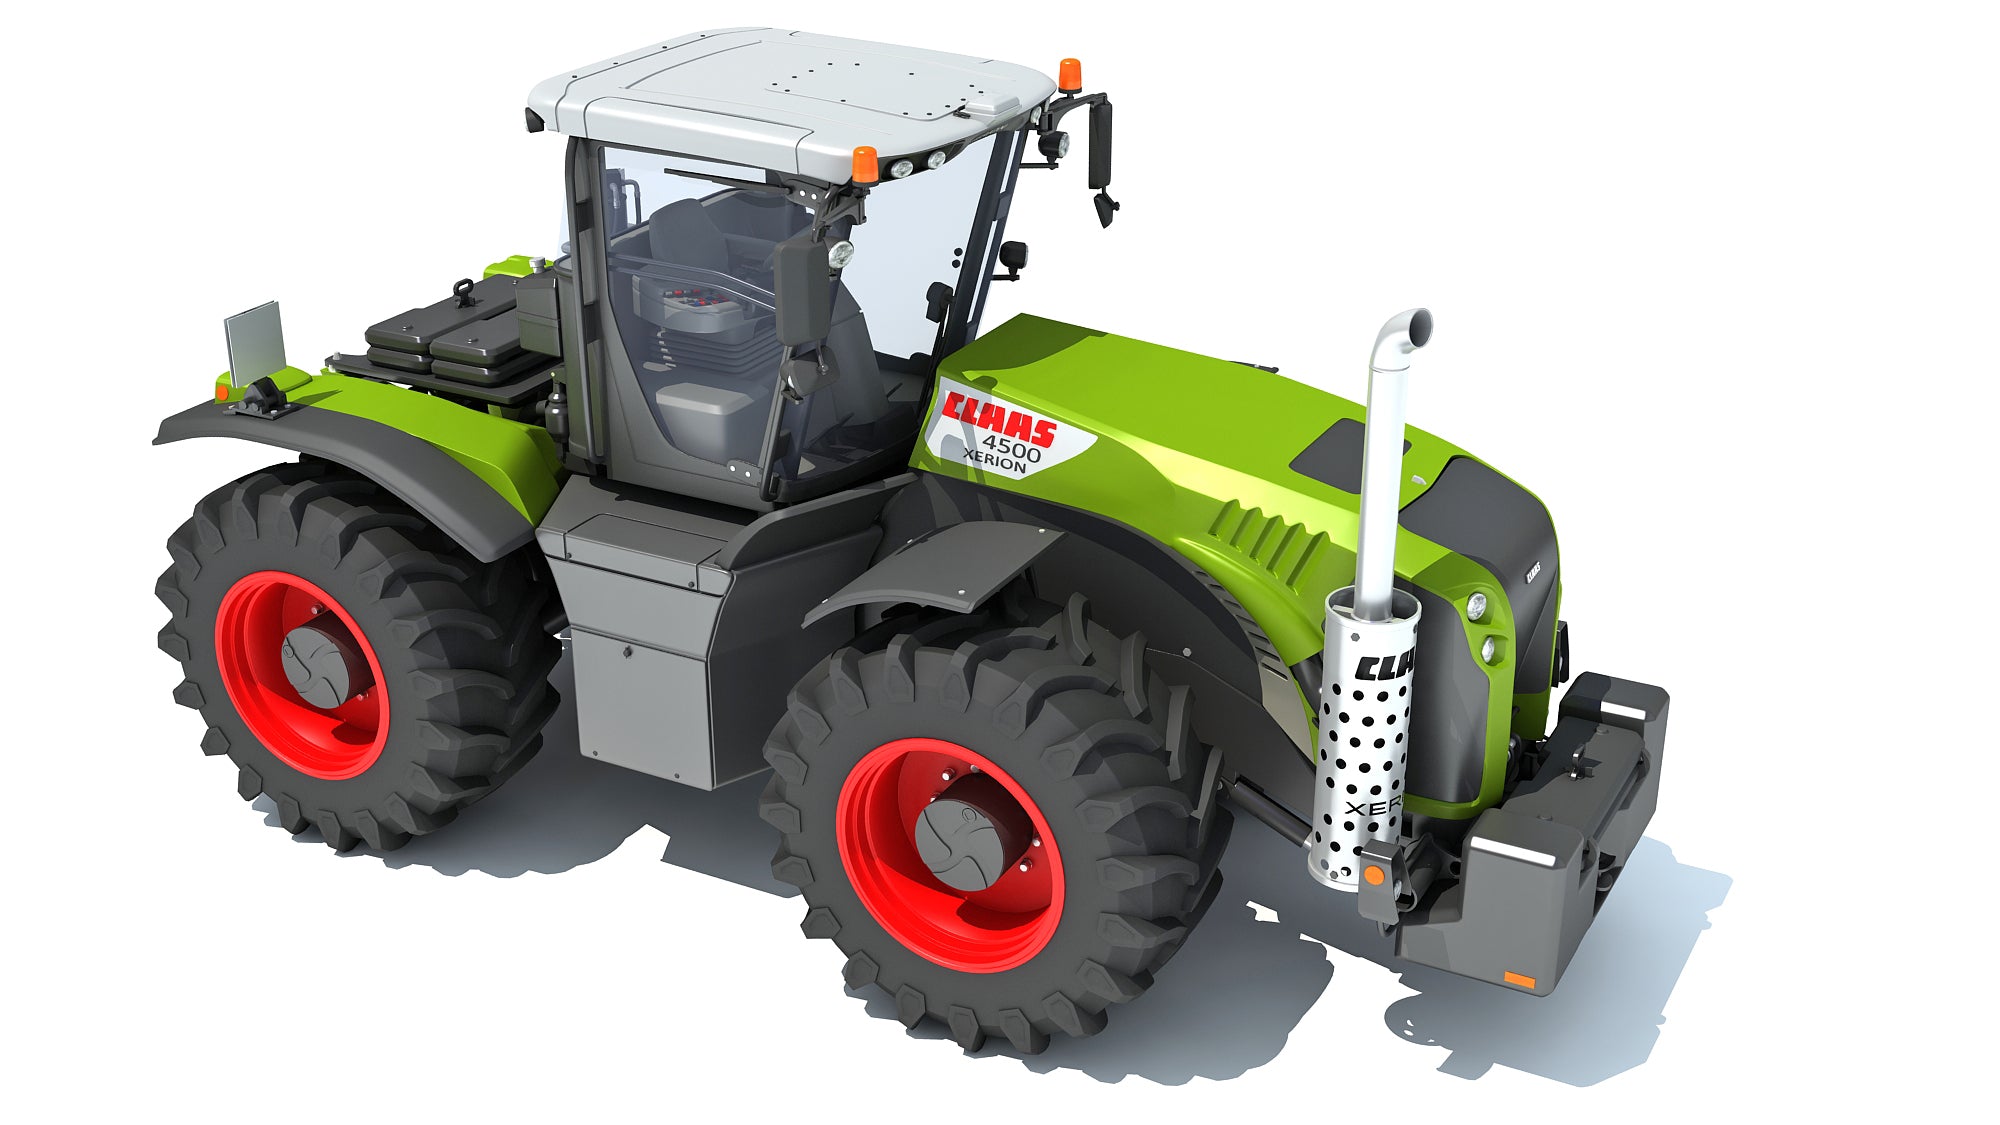 CLAAS Xerion Tractor